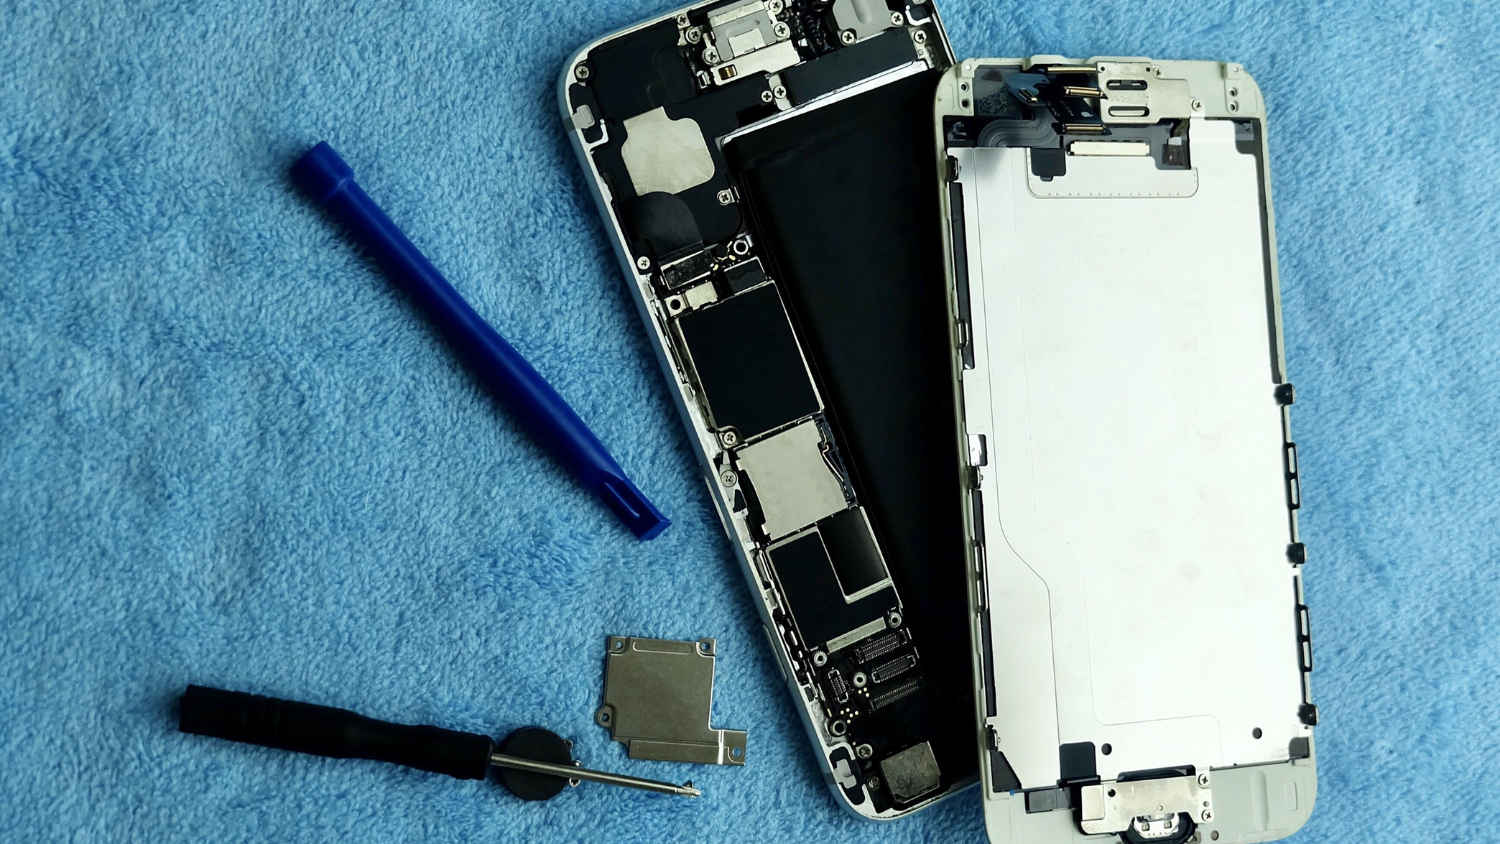 Want to repair iPhone at home? Apple’s making it easier with new repair policy